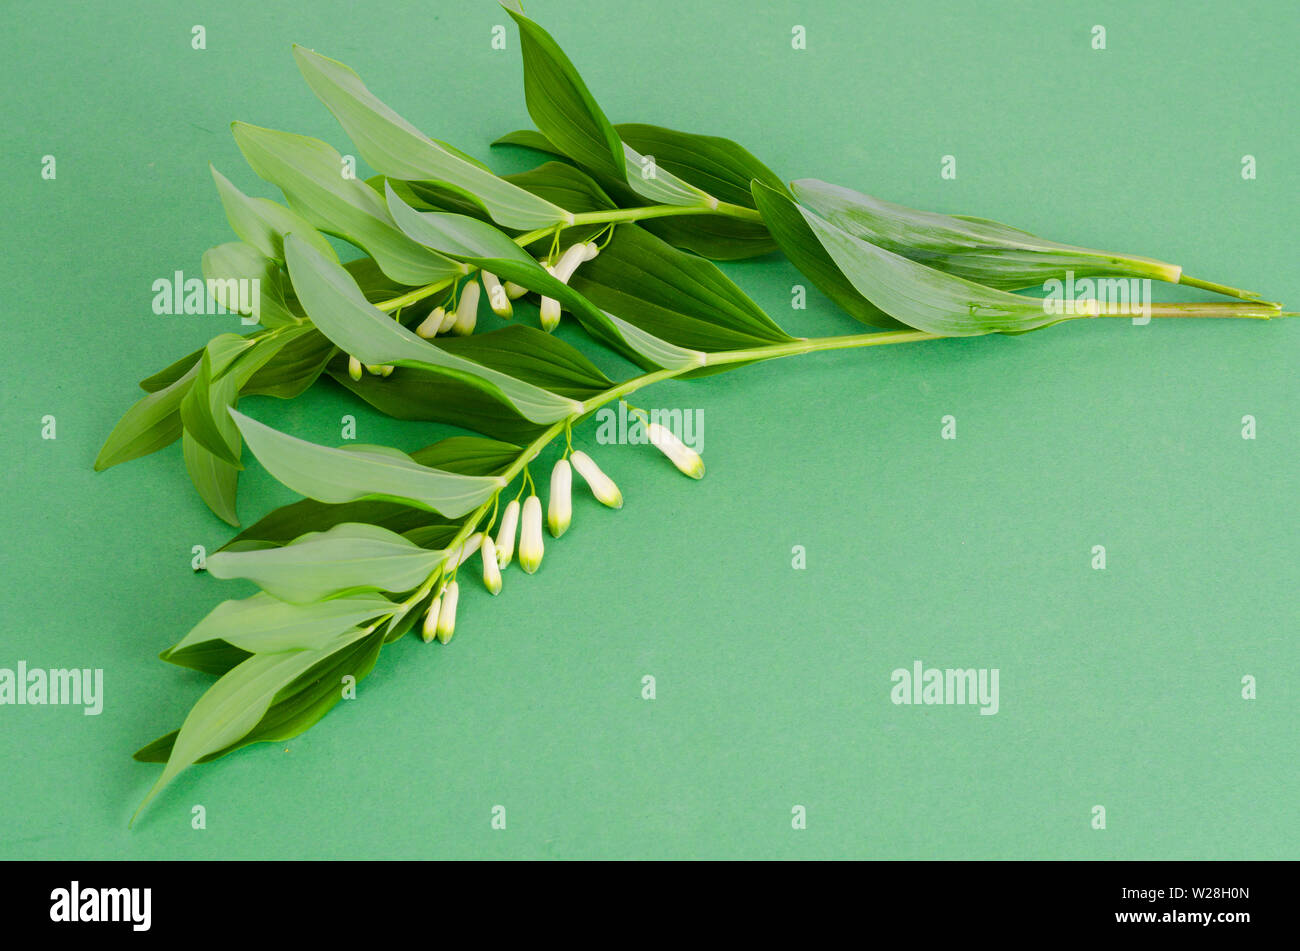 Polygonatum officinalis branch with white flowers and green leaves.  Stock Photo